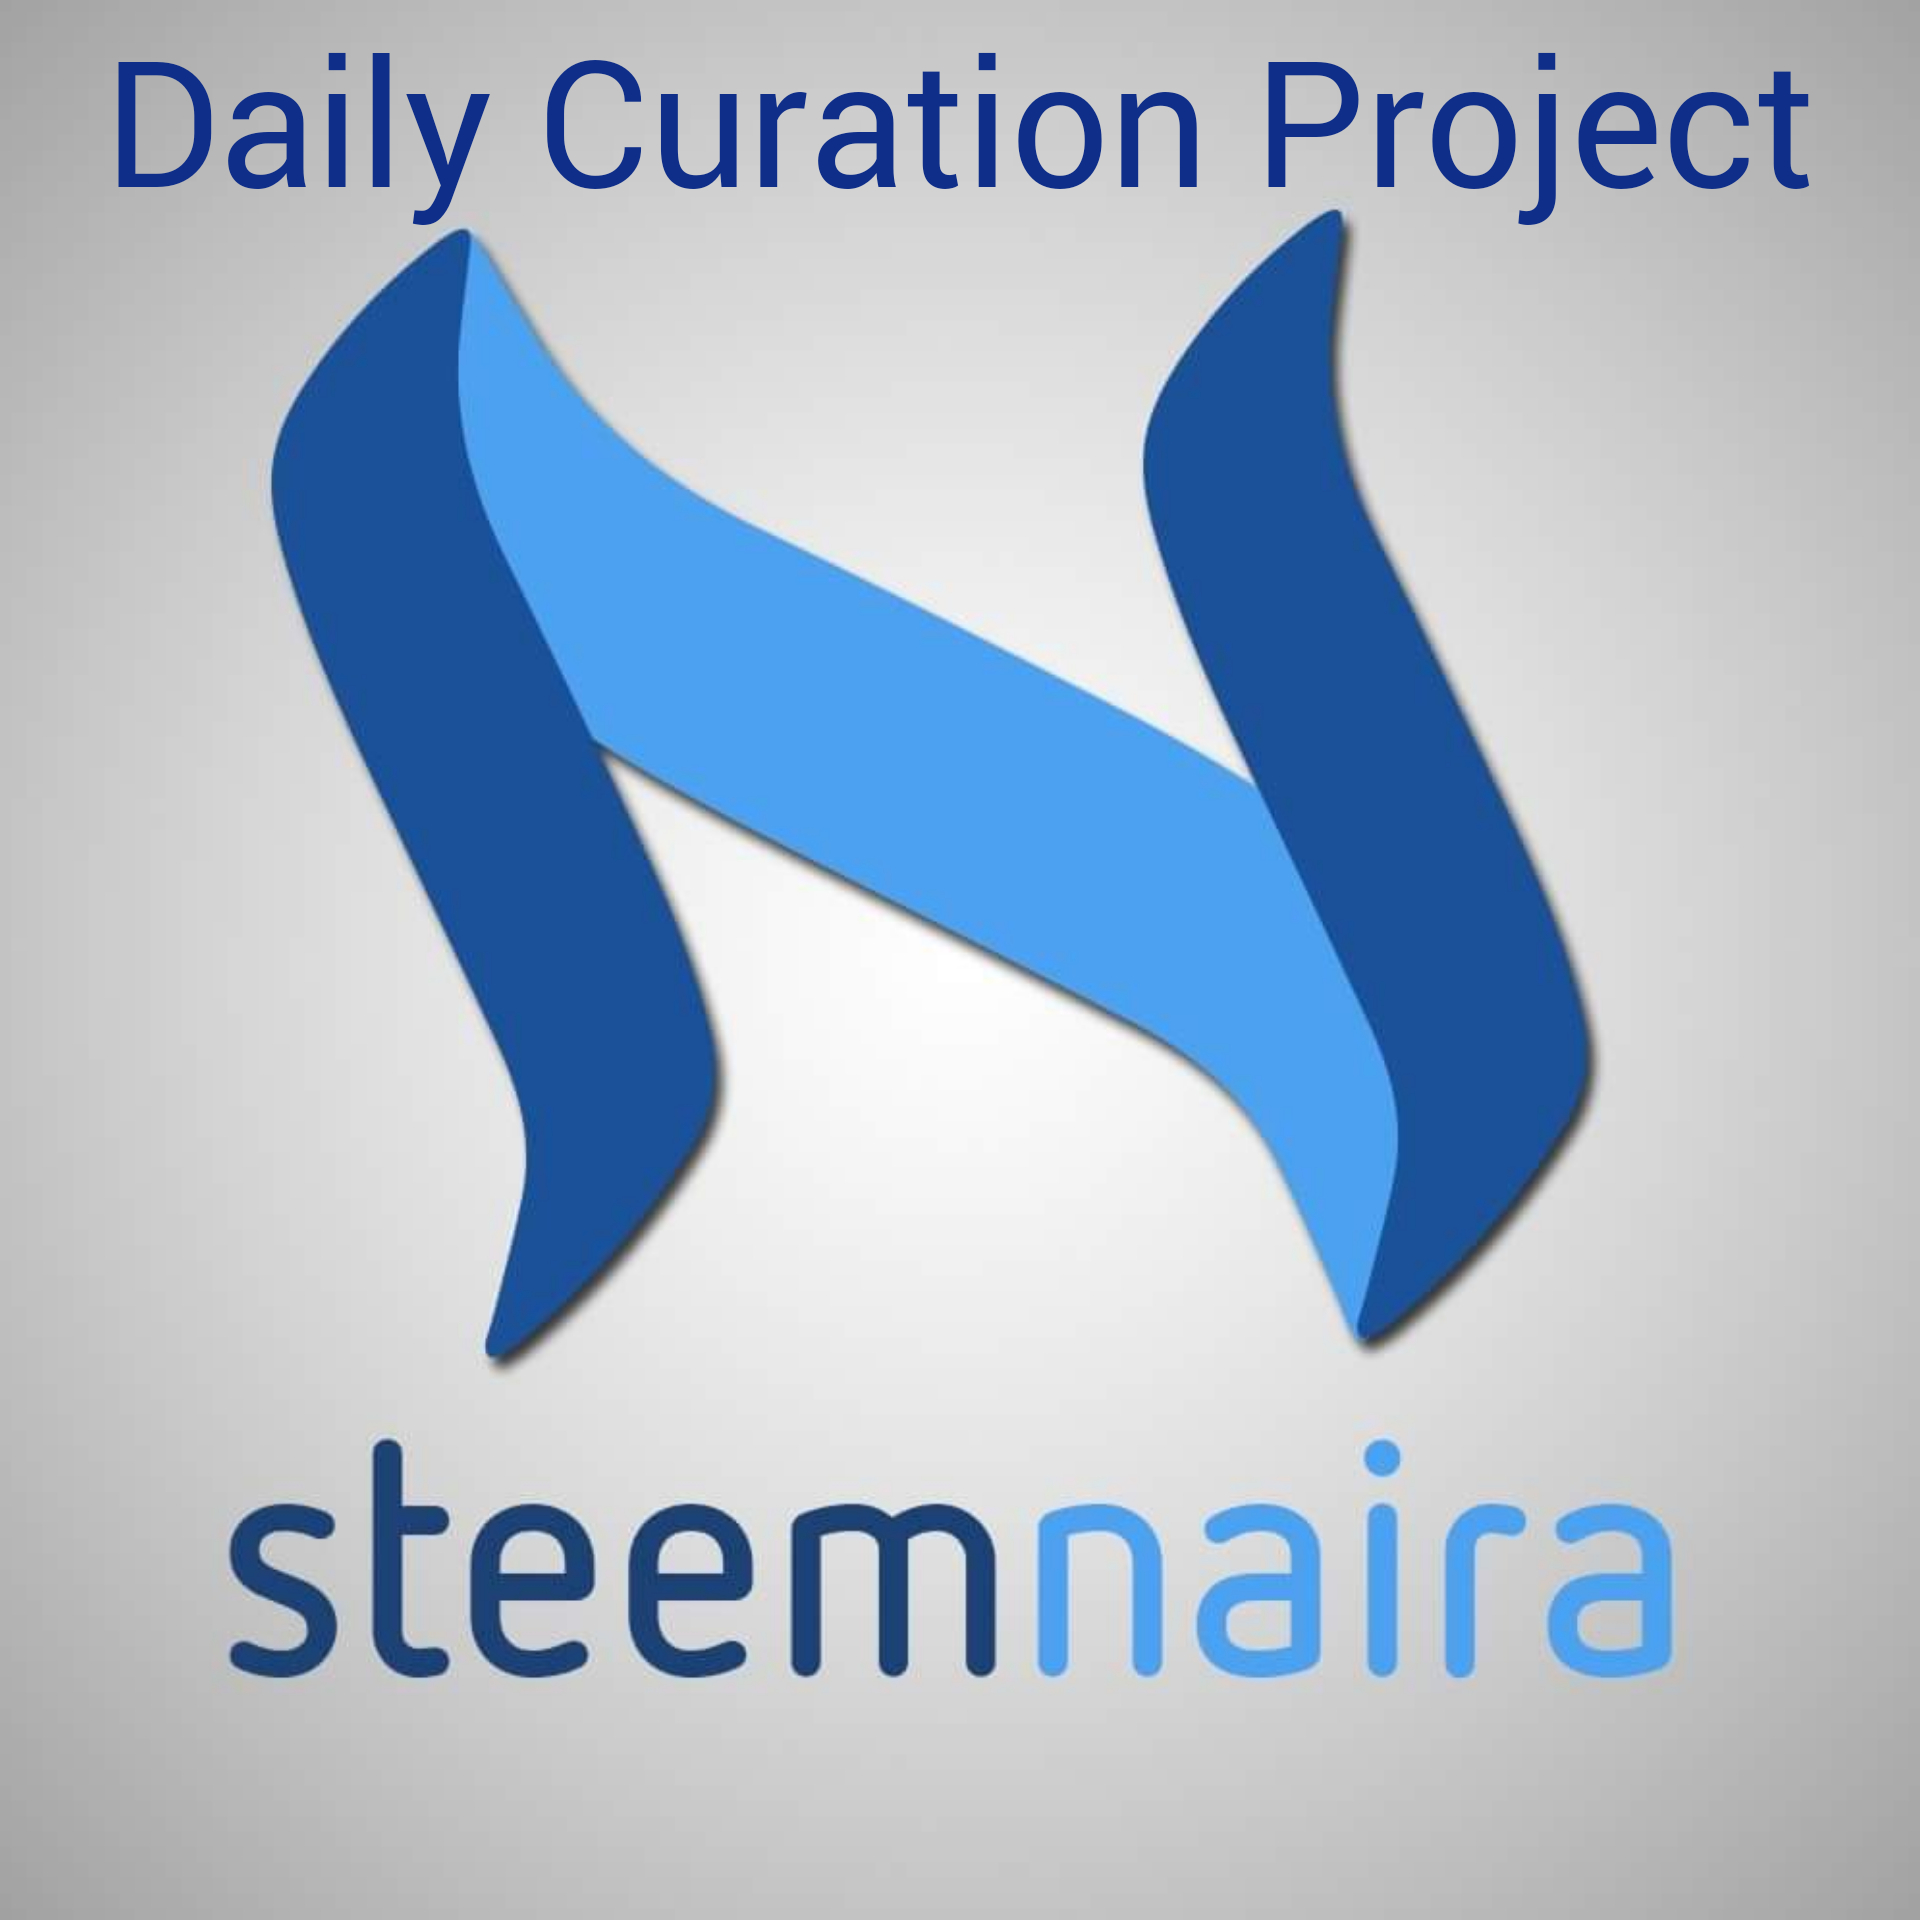 Steemnaira_curation_project.jpg